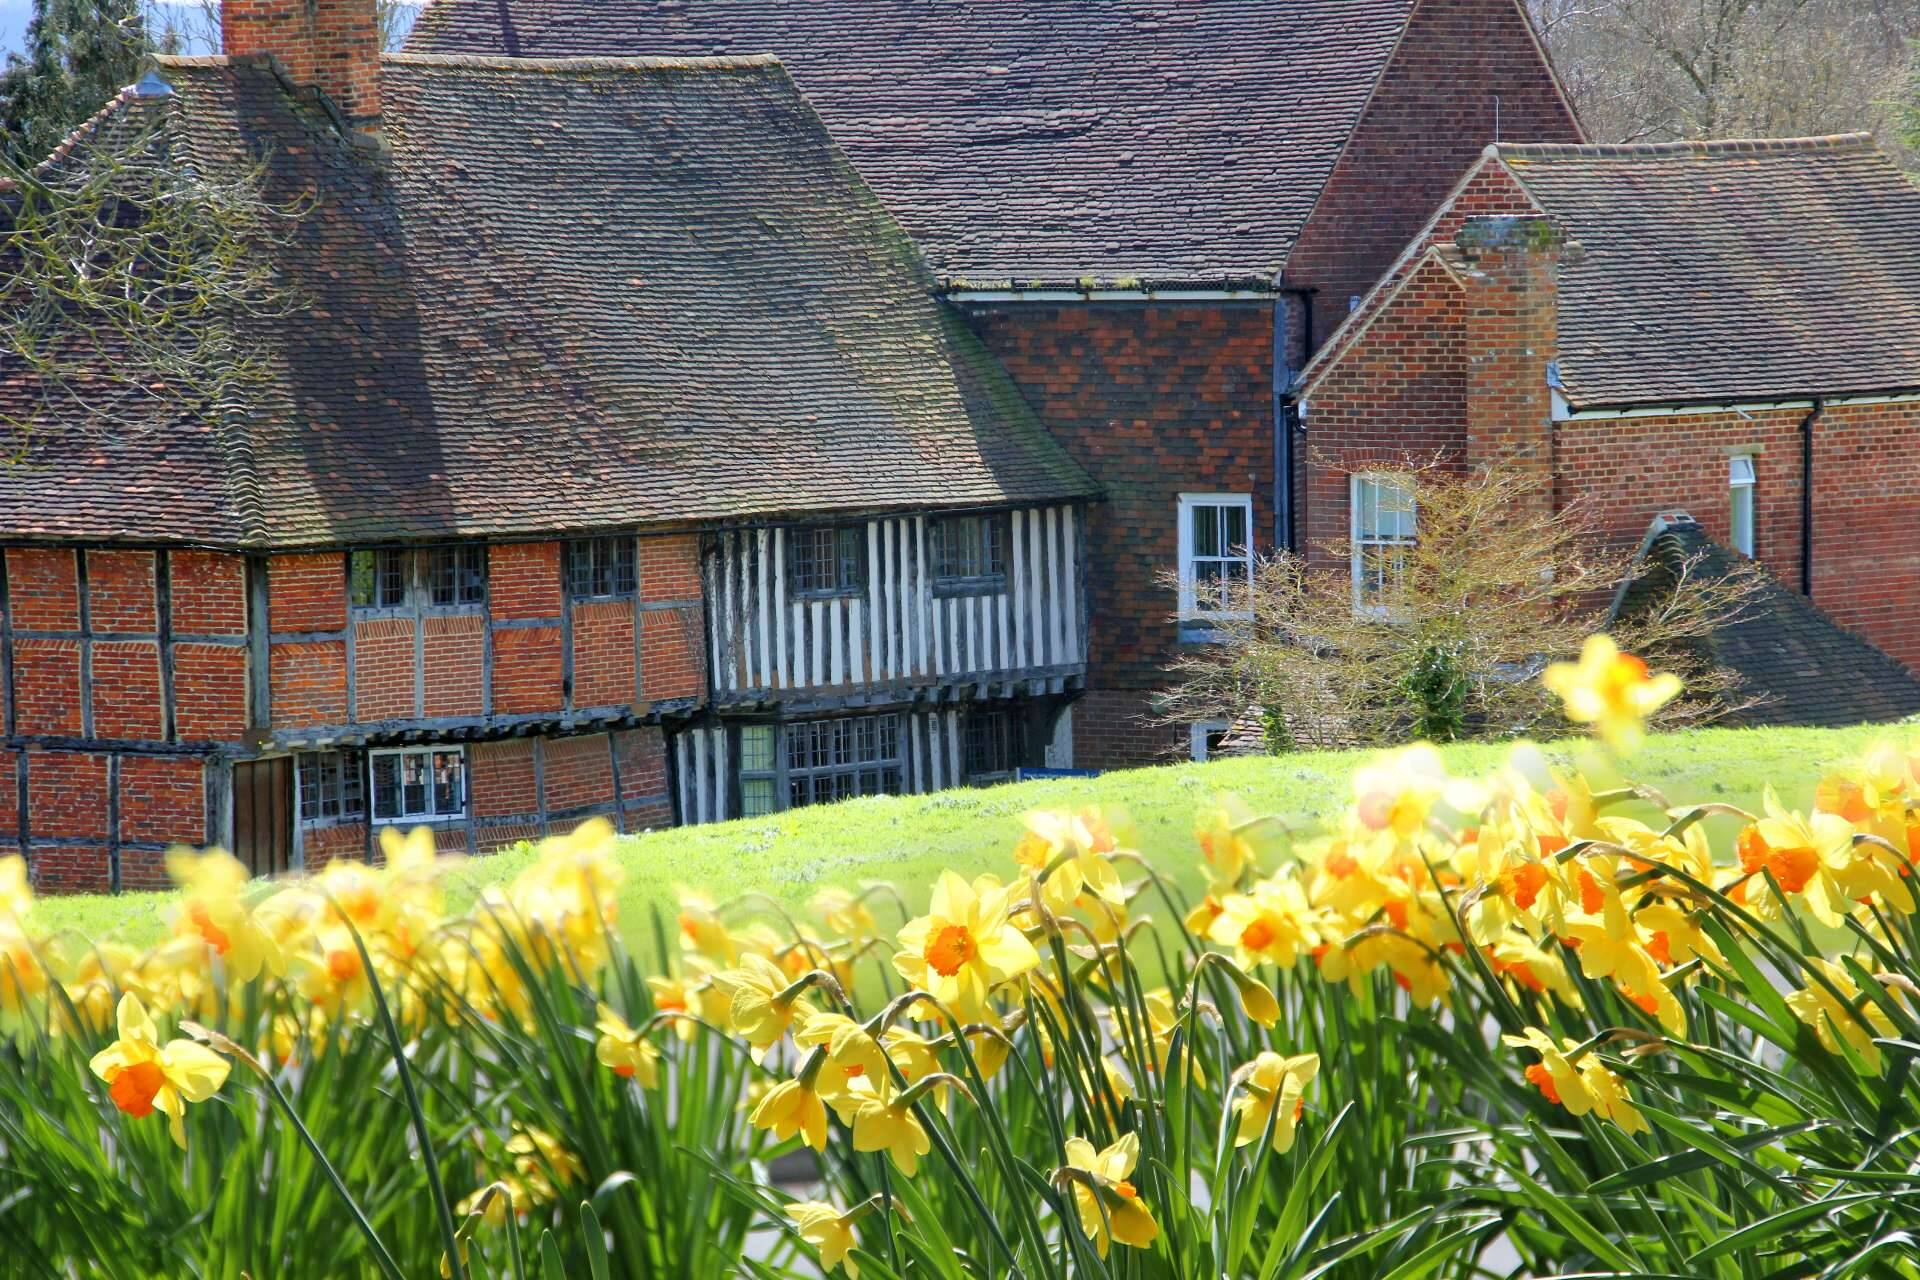 Beverley Farm in the spring